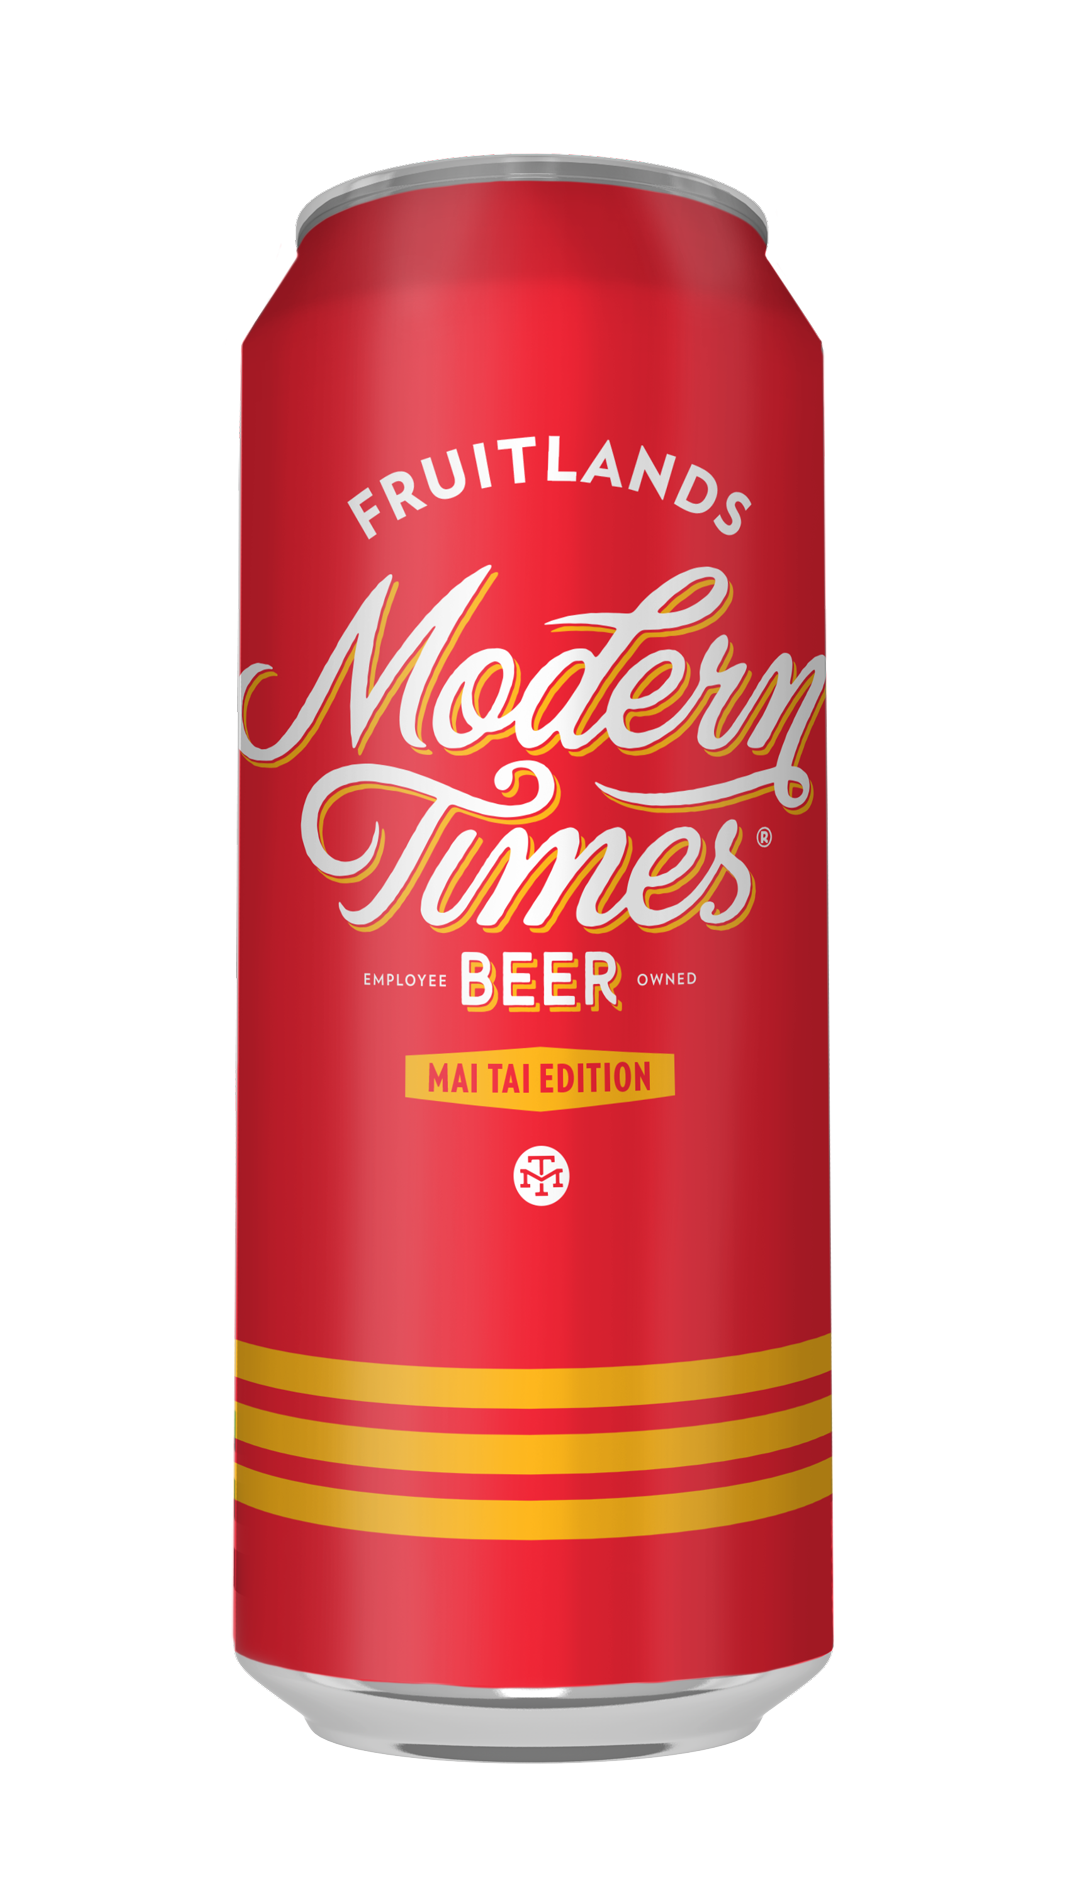 Buy Modern Times Fruitlands May Tai Edition Online -Craft City